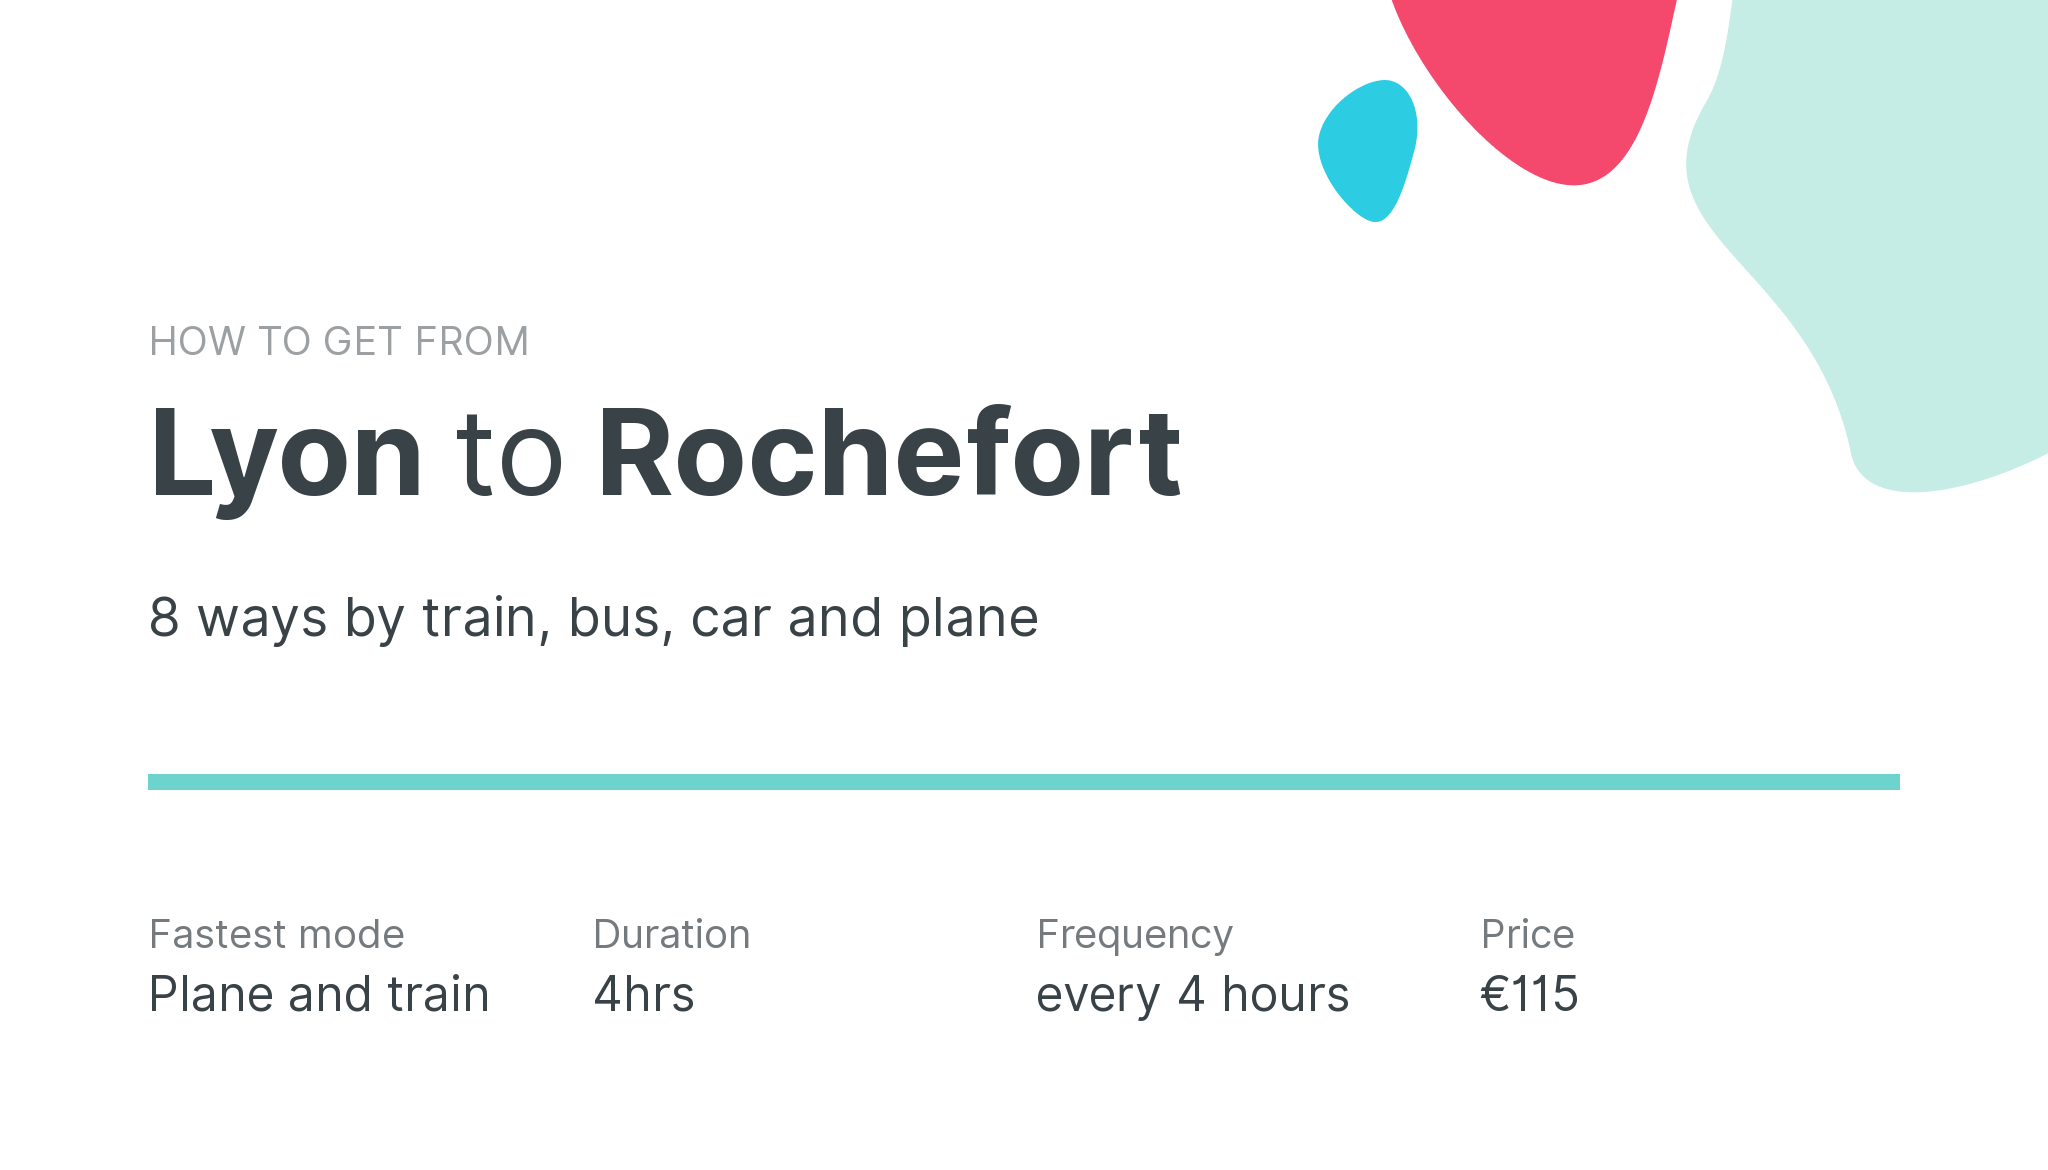 How do I get from Lyon to Rochefort